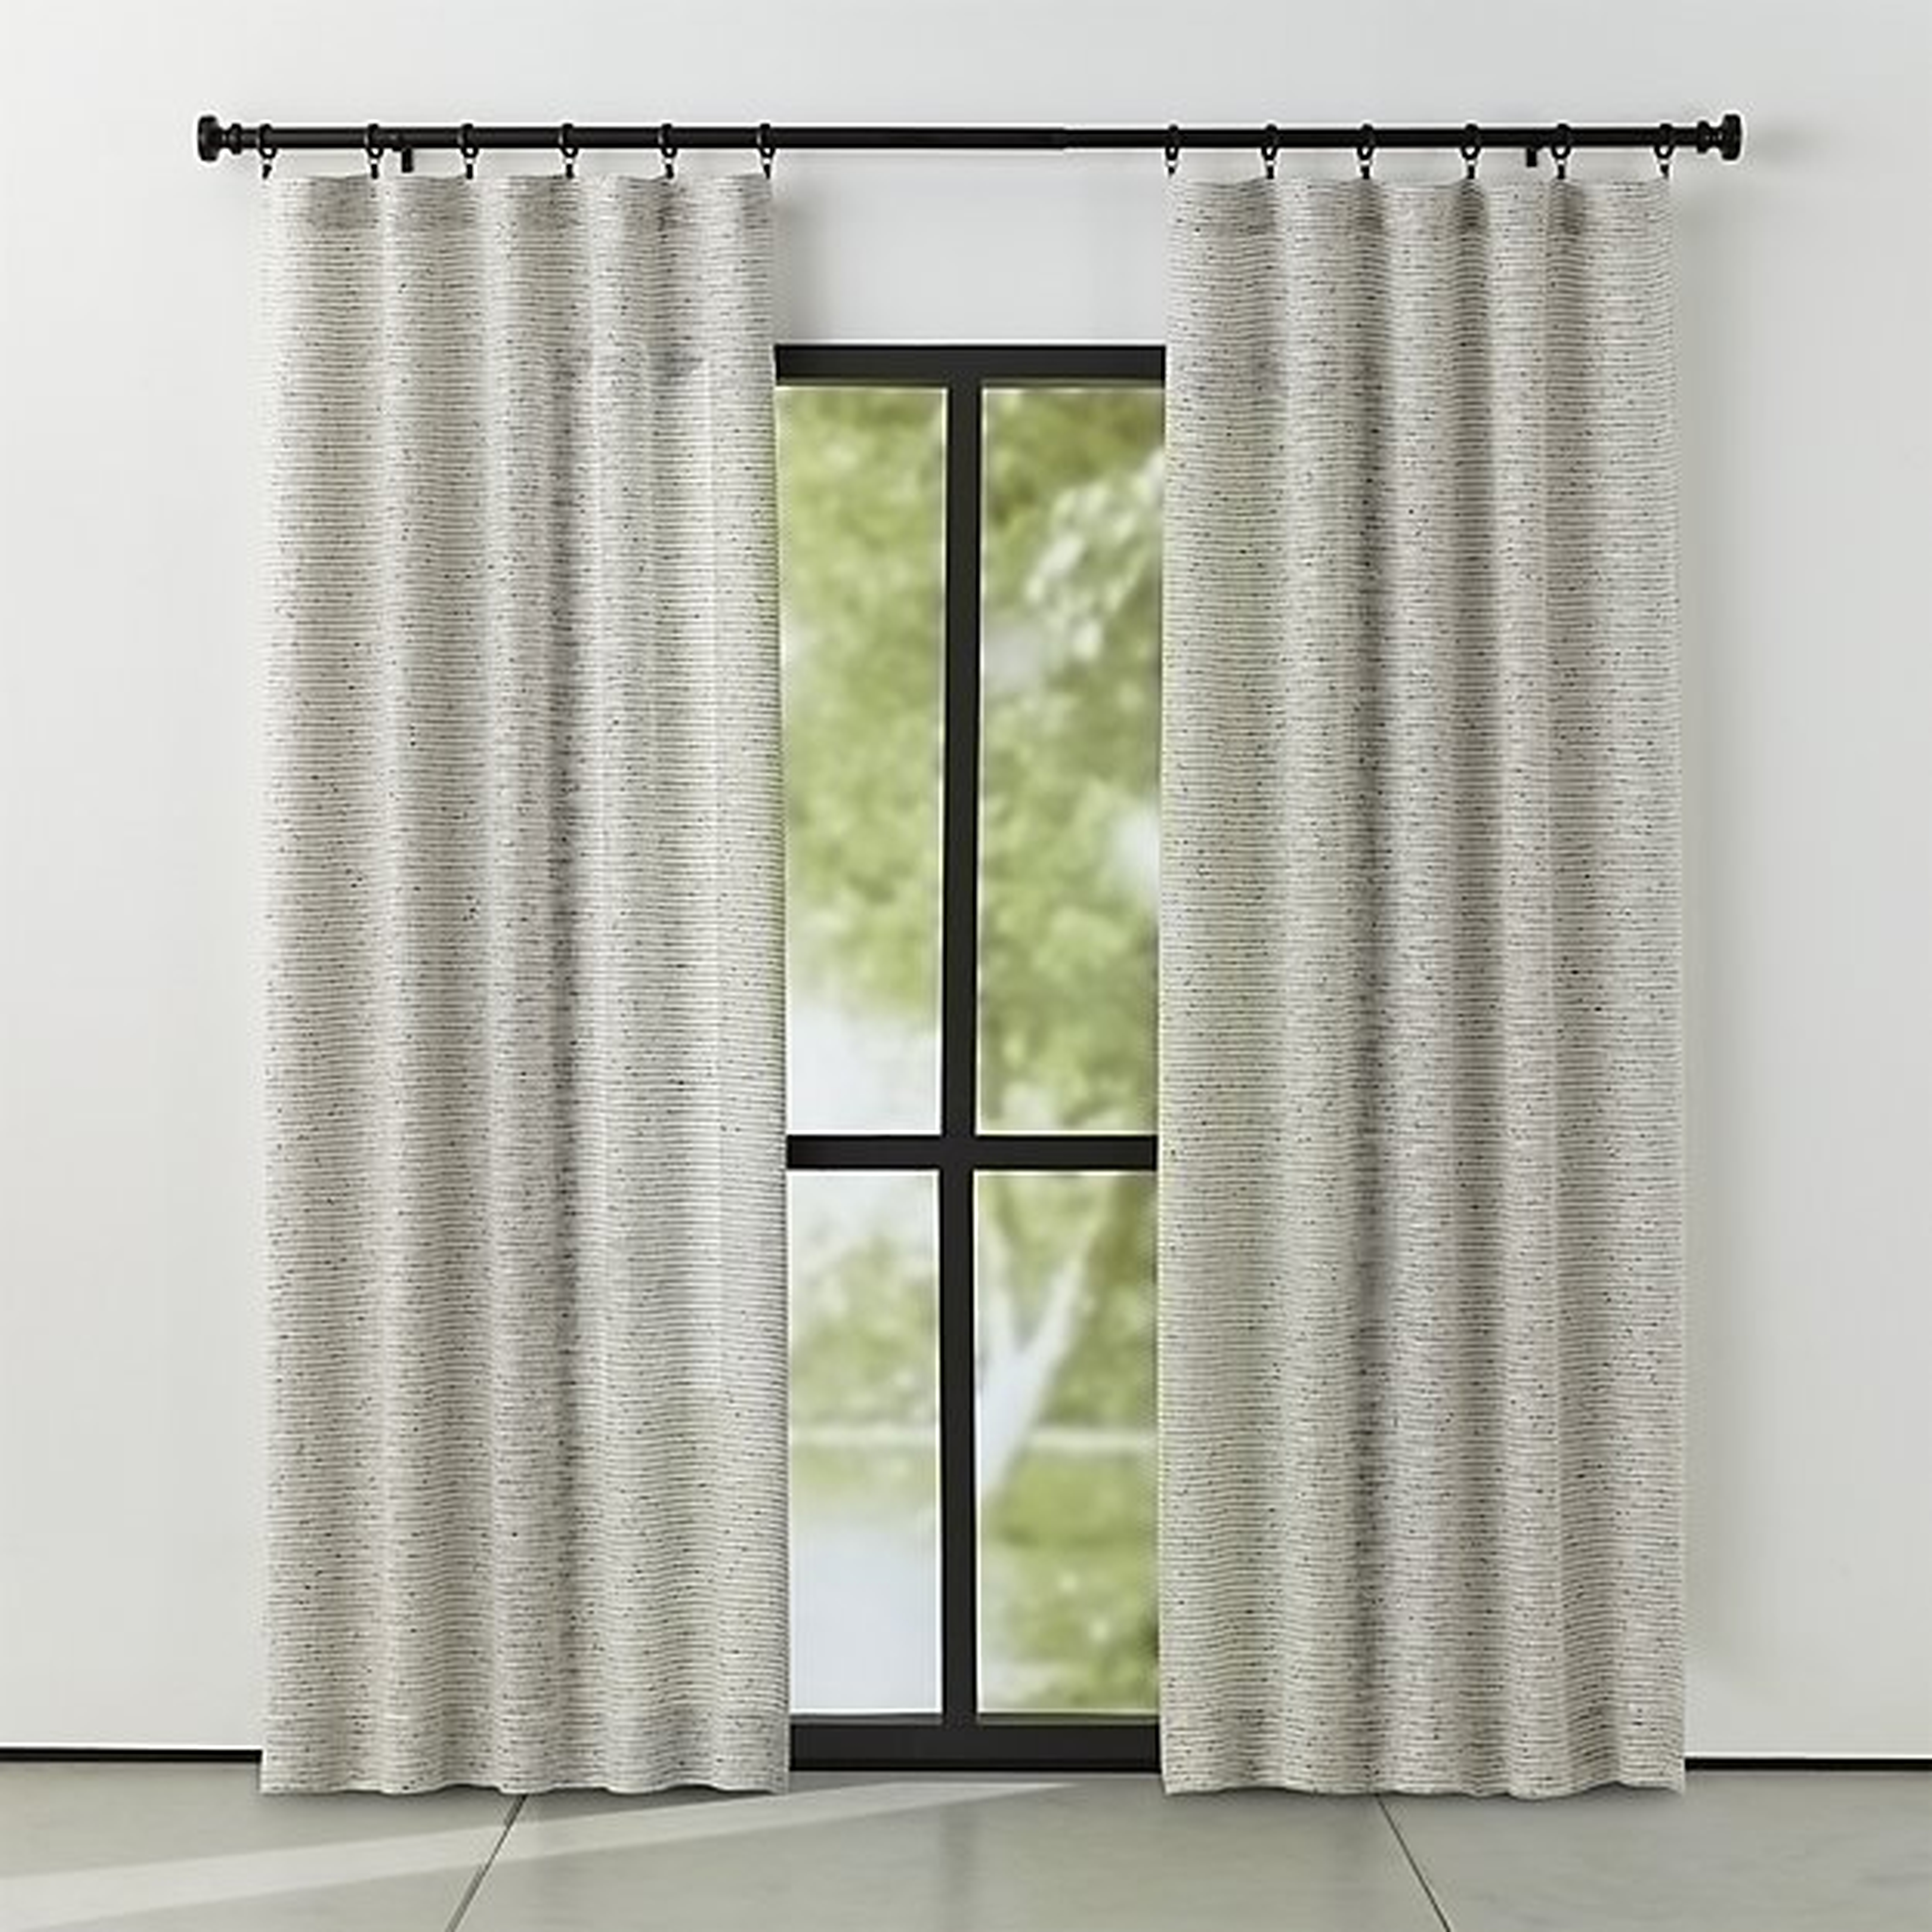 Vesta Textured Curtain Panel 50x108 - Crate and Barrel